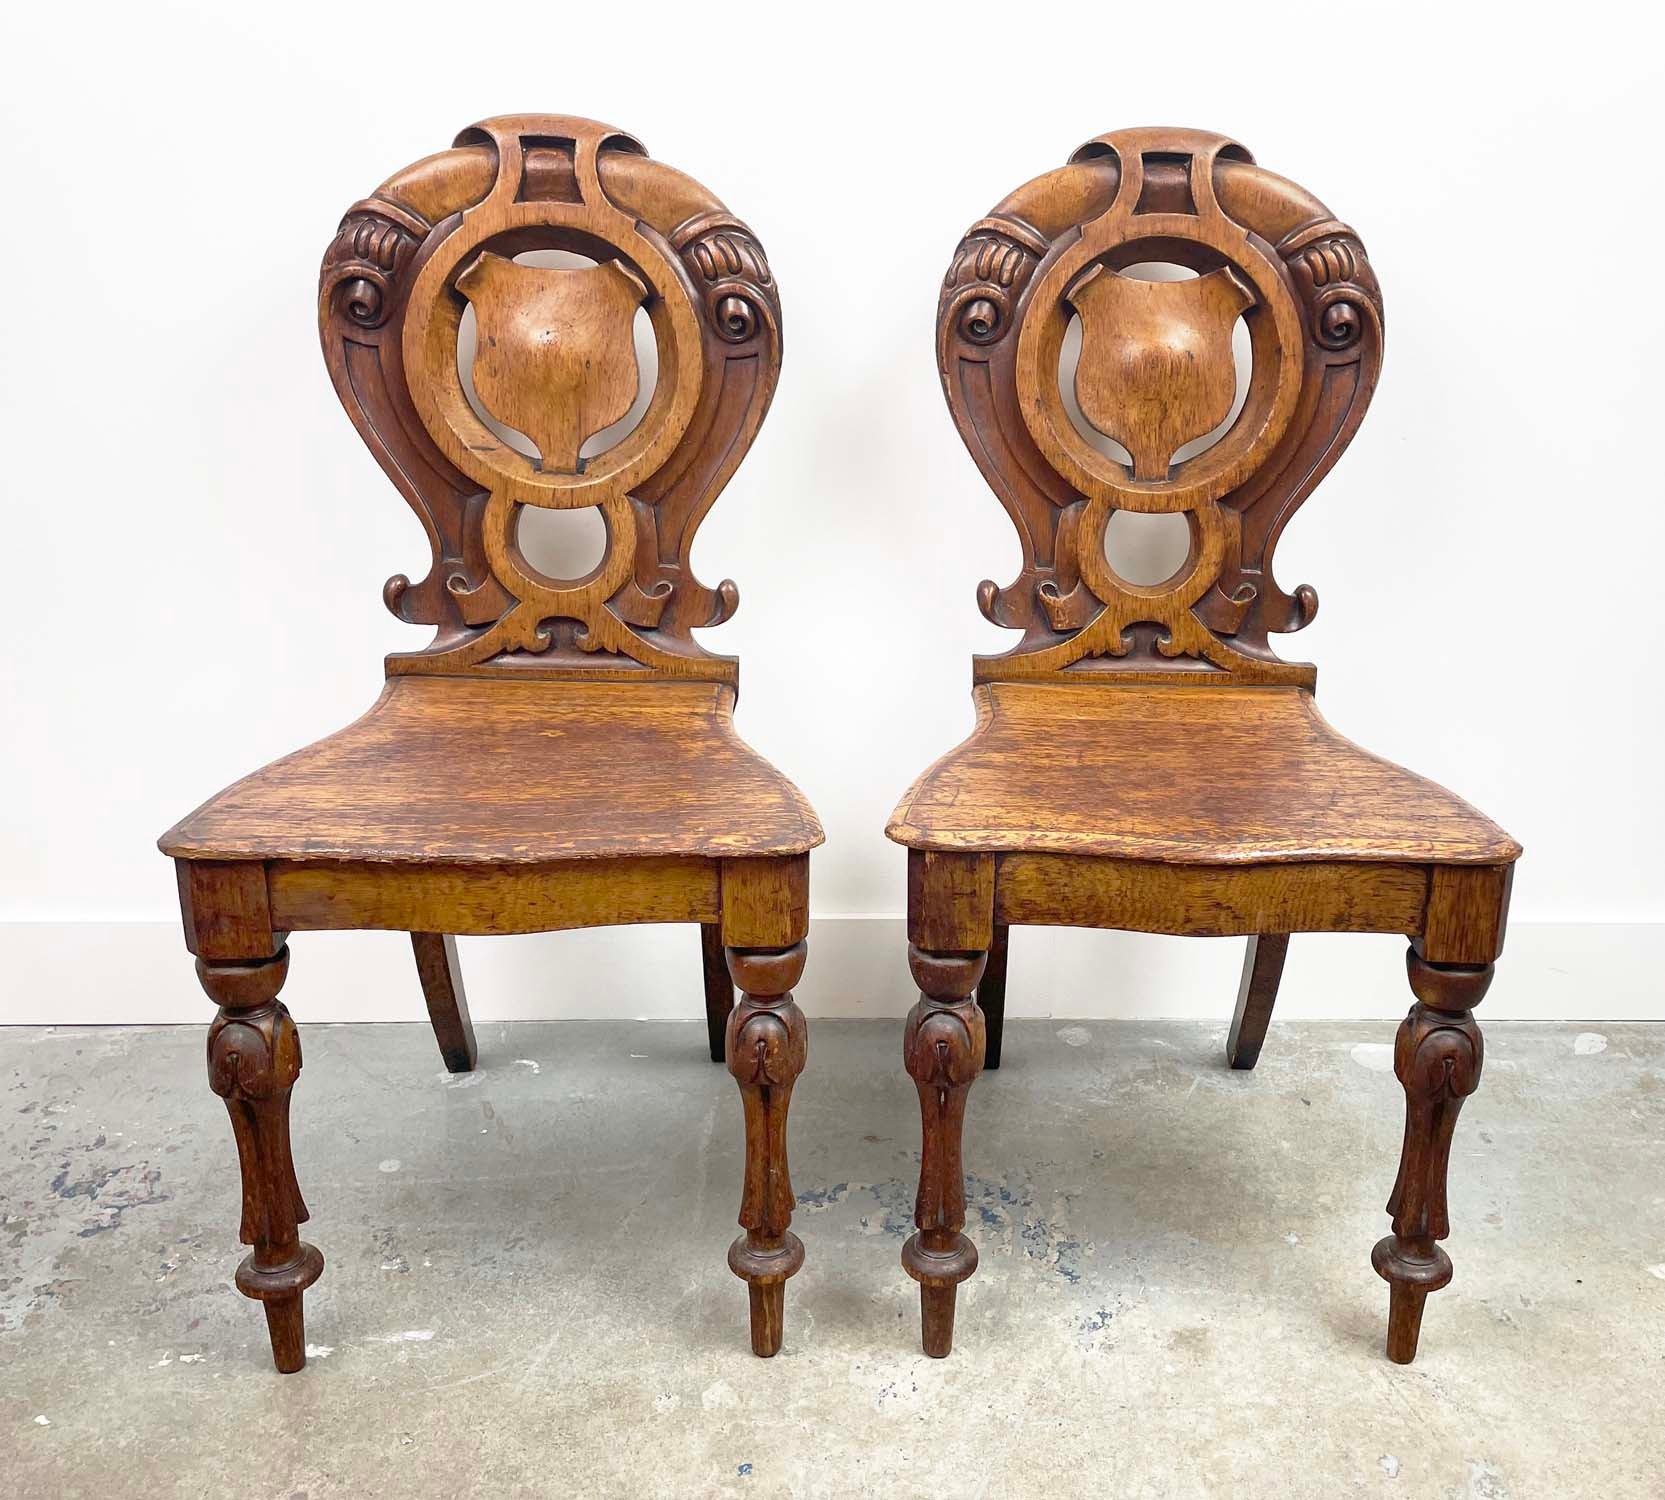 HALL CHAIRS, a pair, Victorian oak, with ornately carved and pierced backs. (2) - Image 2 of 11